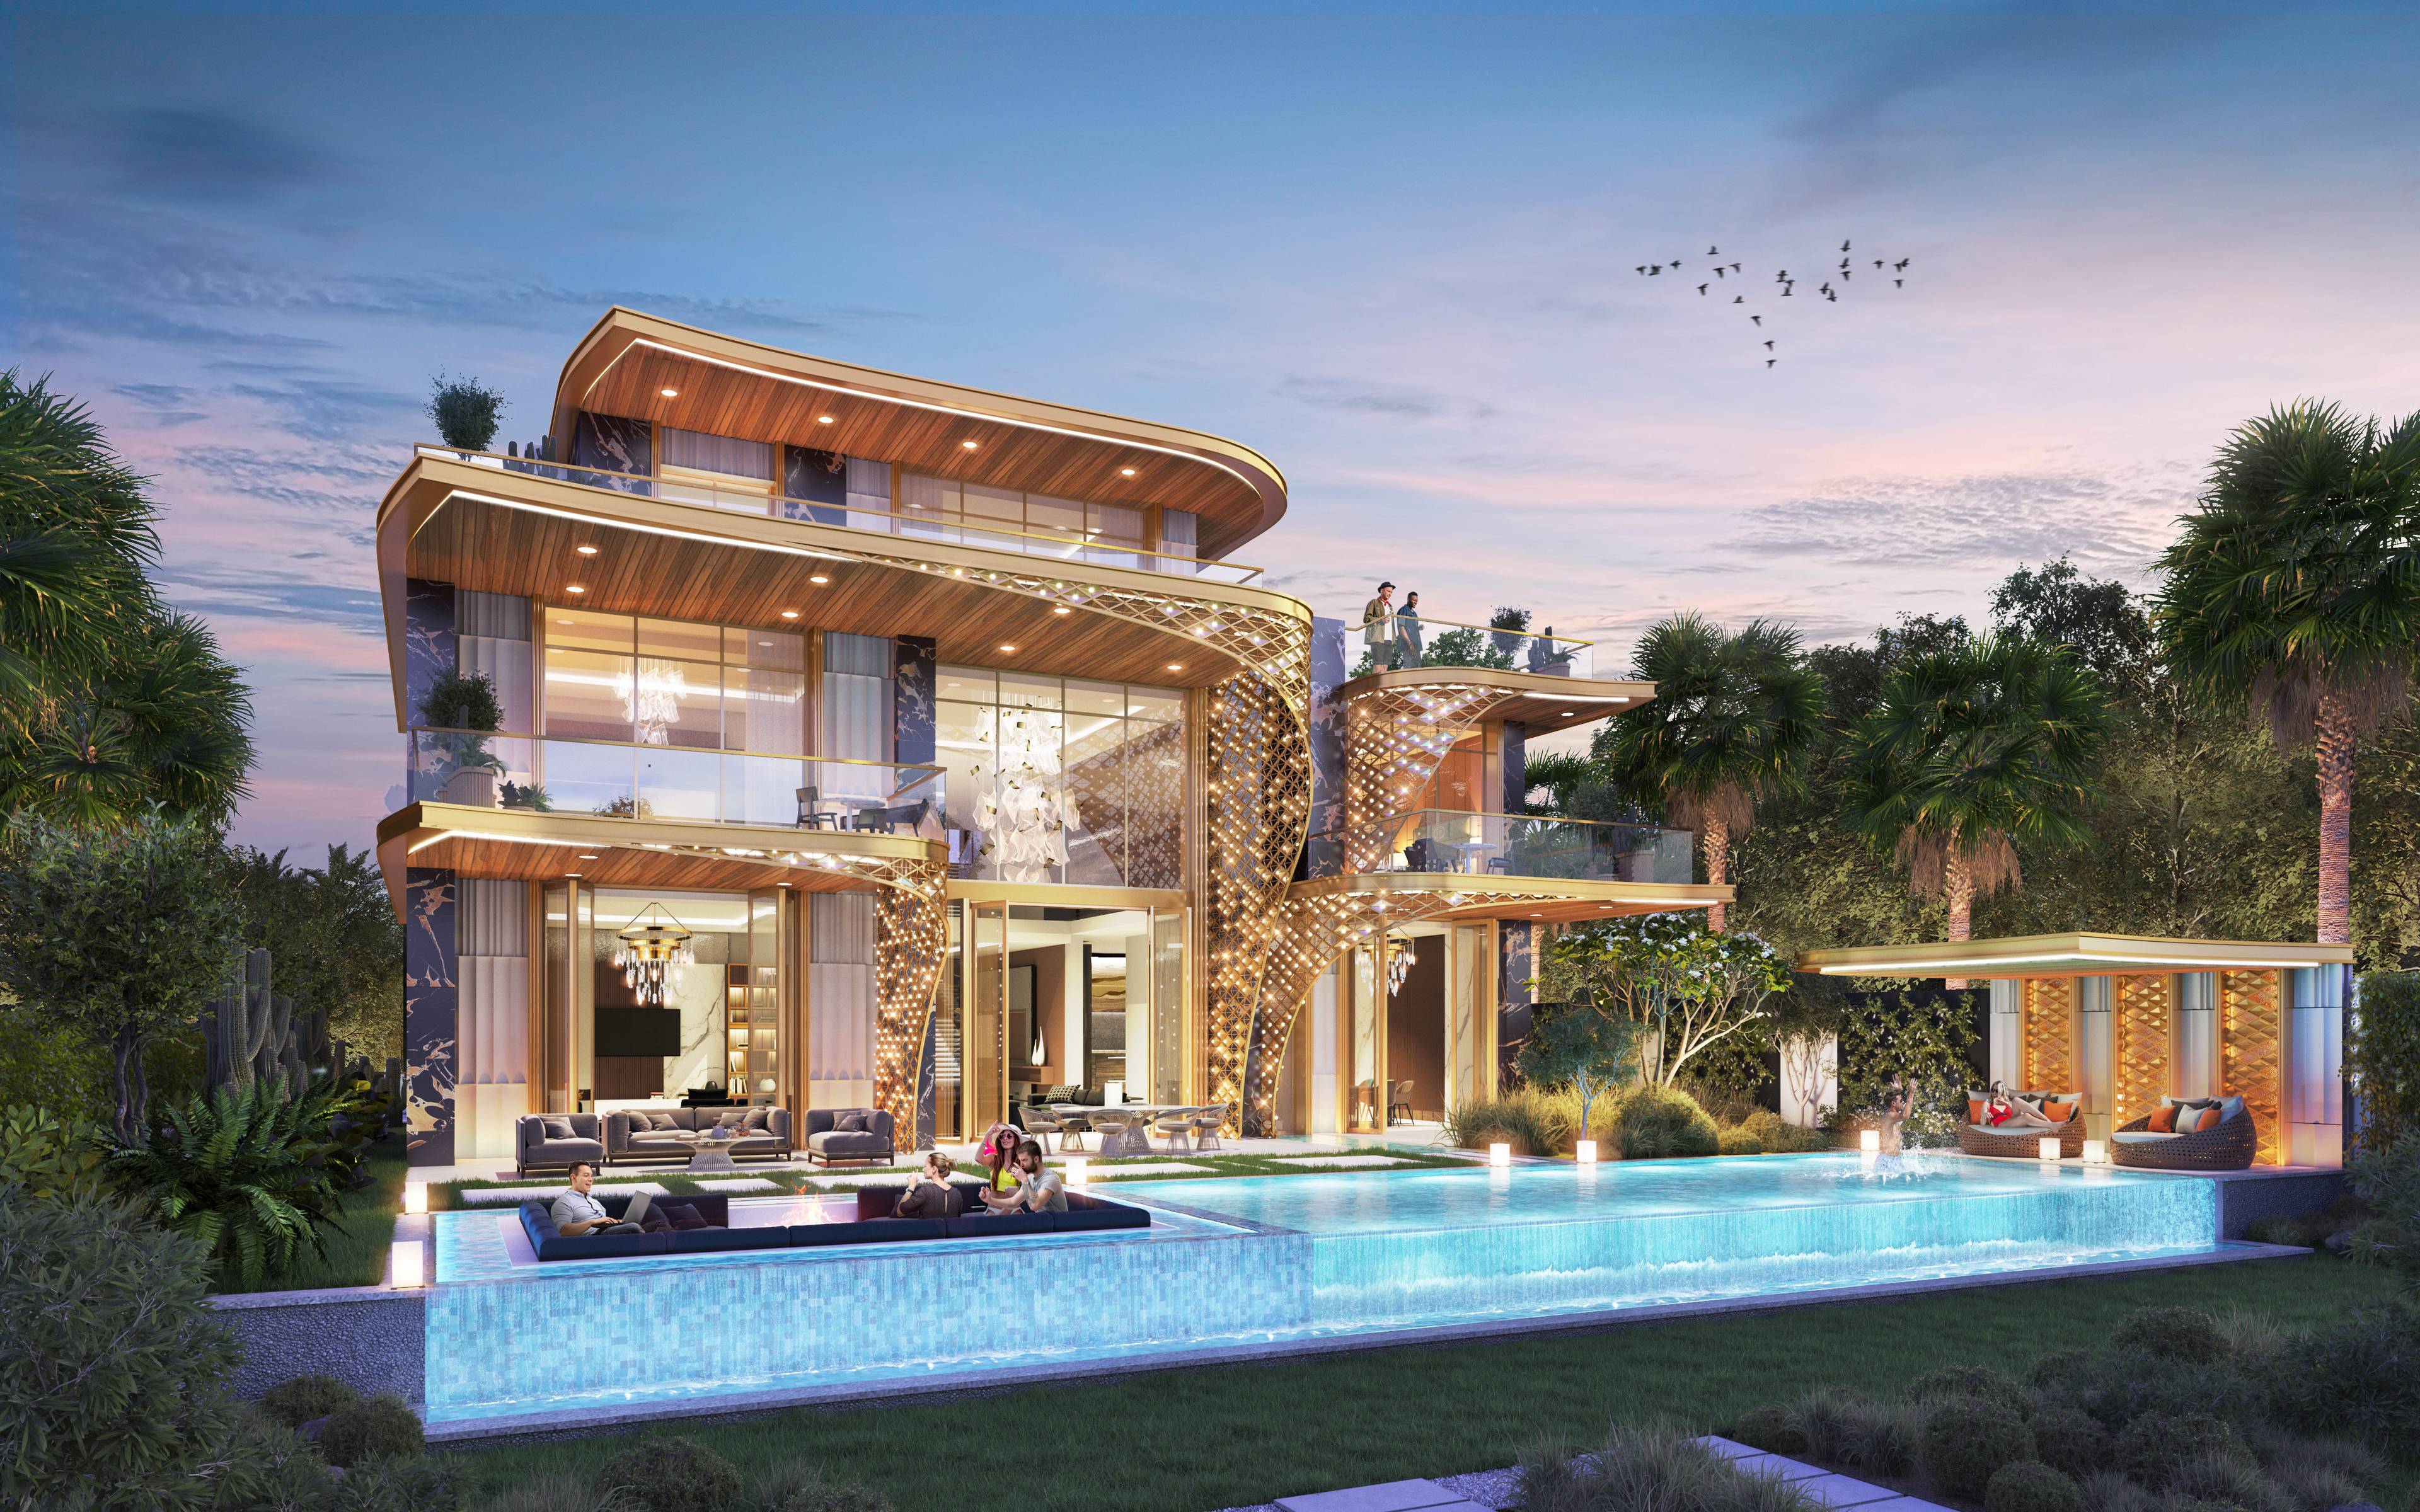 7-BEDROOM LUXURY EXTRAVAGANZA IN DAMAC HILLS: A SPLENDID VILLA WITH BASEMENT, PRIVATE LIFT, AND MULTIPLE AMENITIES